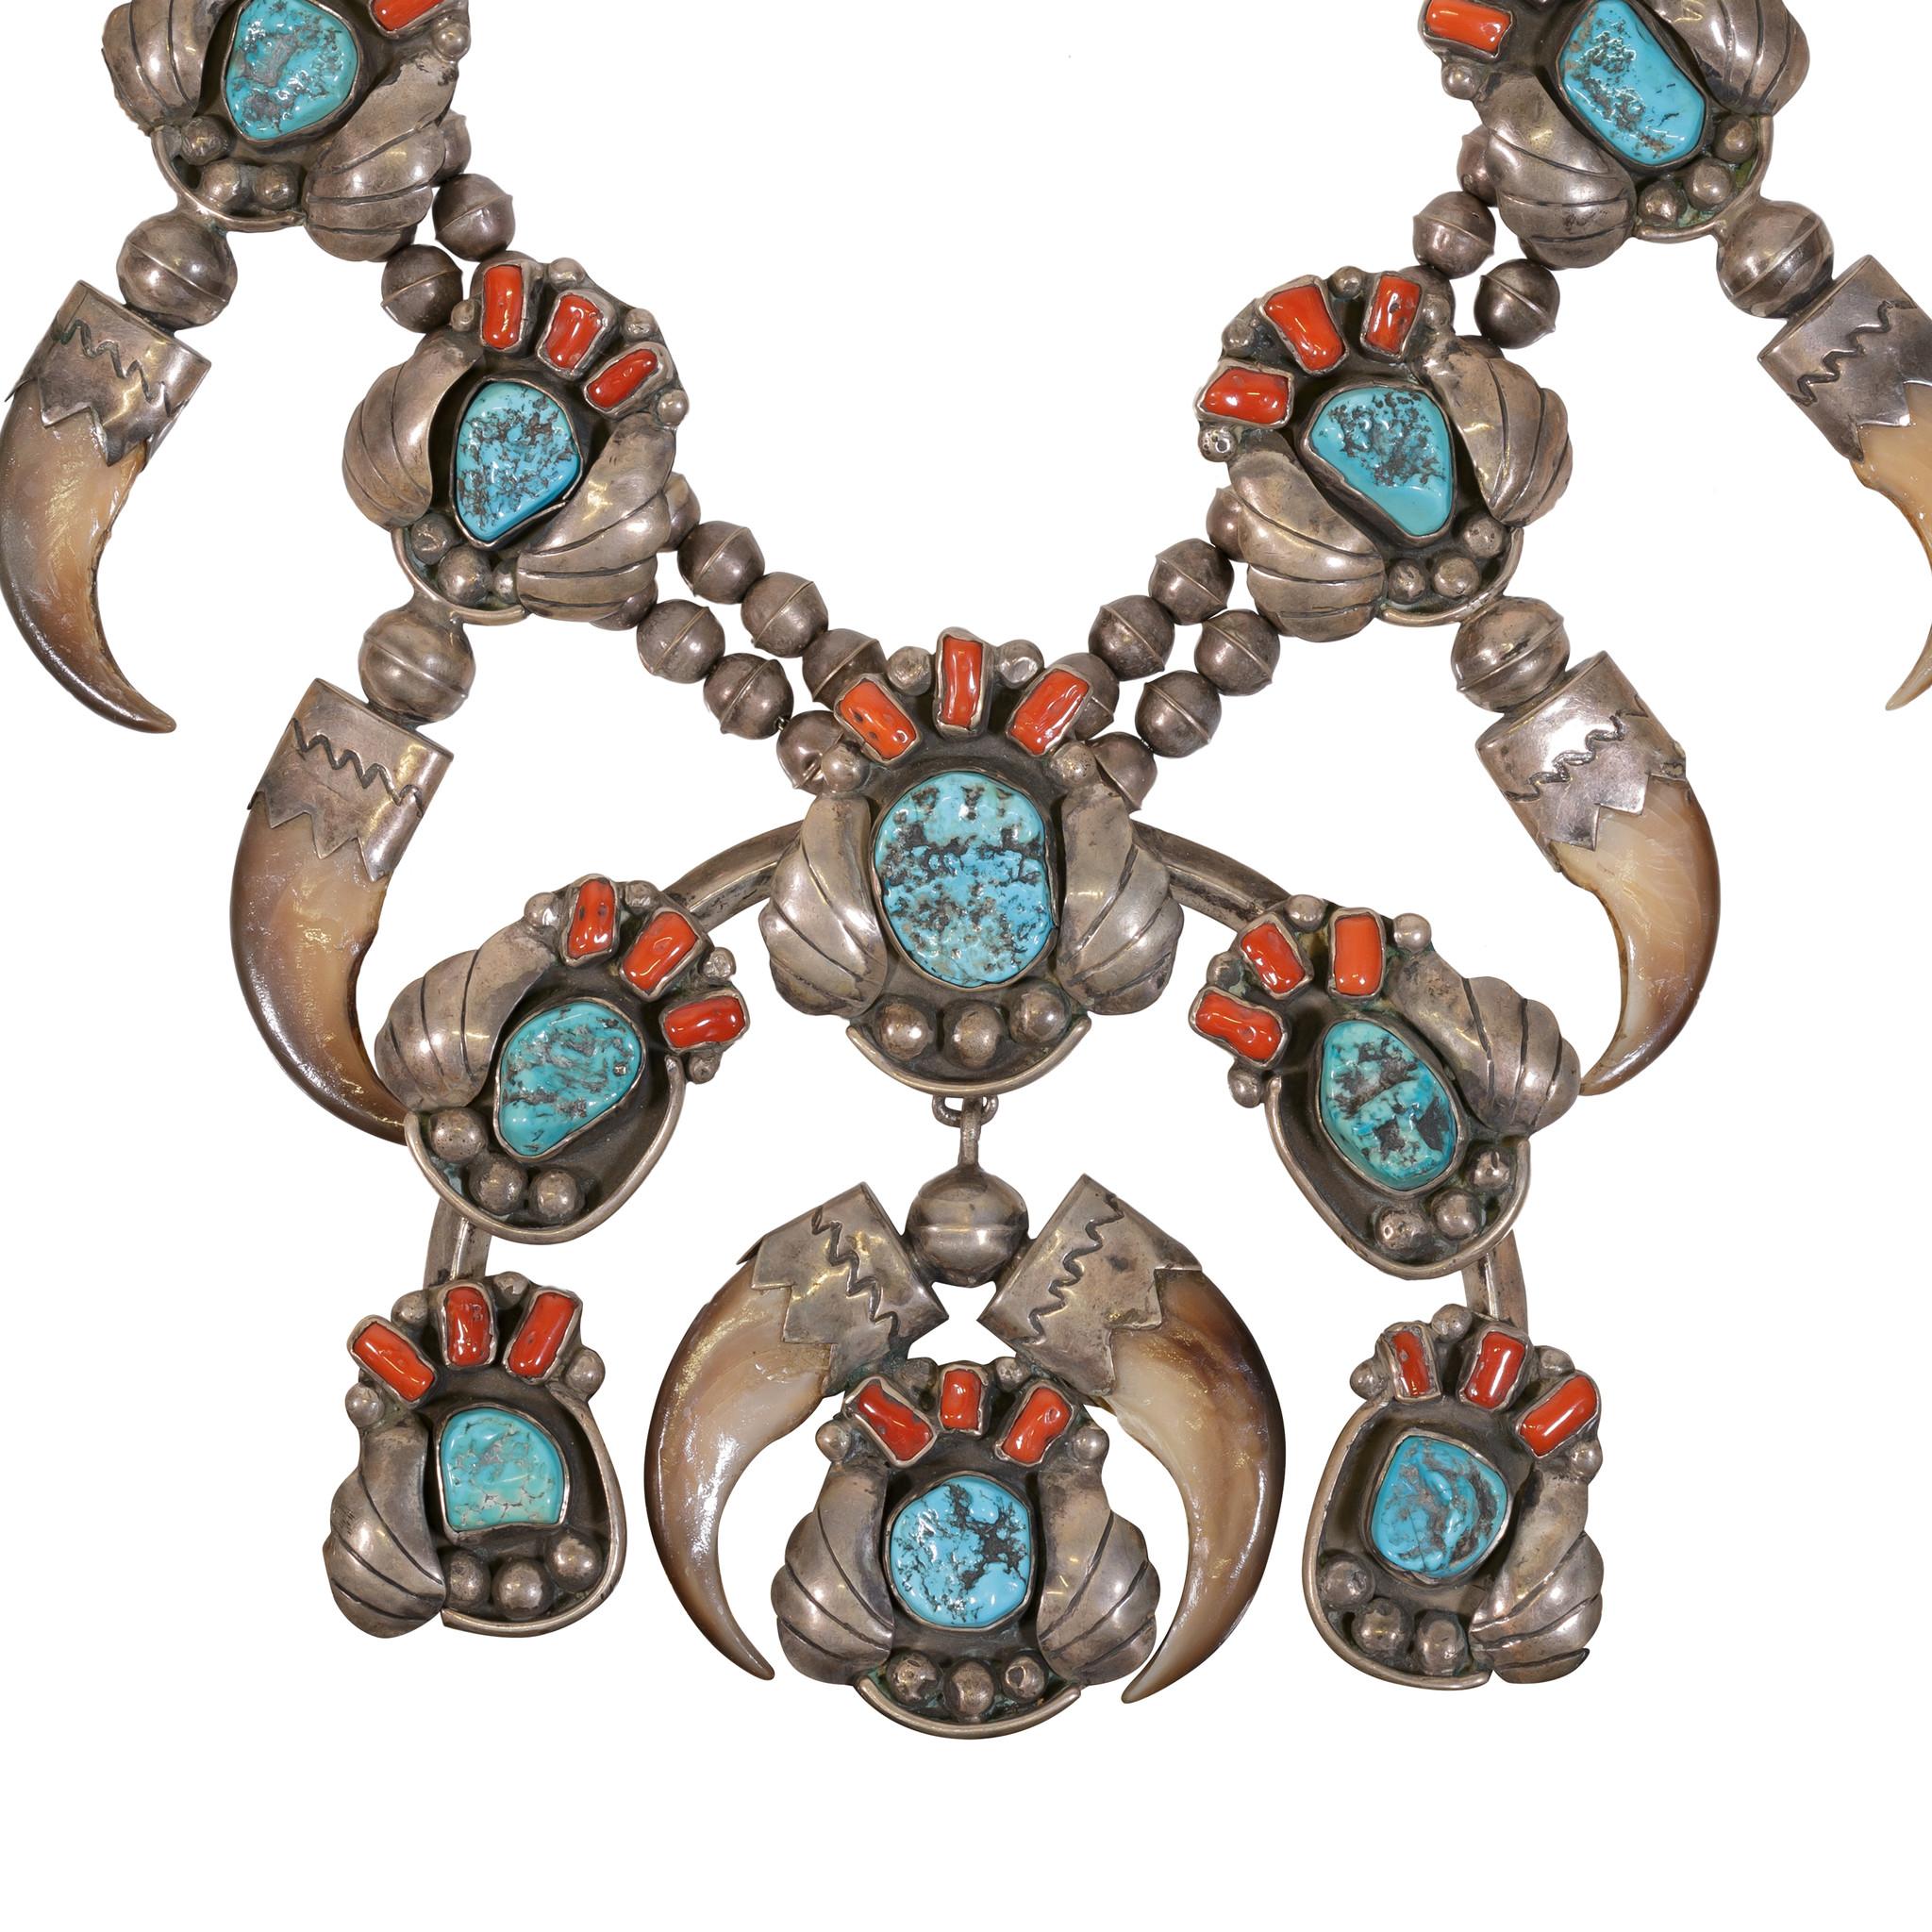 The turquoise is from the Kingman Mine in Arizona. Bear claw with turquoise and coral. Twelve claws total. Exceptional; museum quality.

PERIOD: Est before 1950

ORIGIN: Navajo, Southwest

SIZE: Length 31 1/4